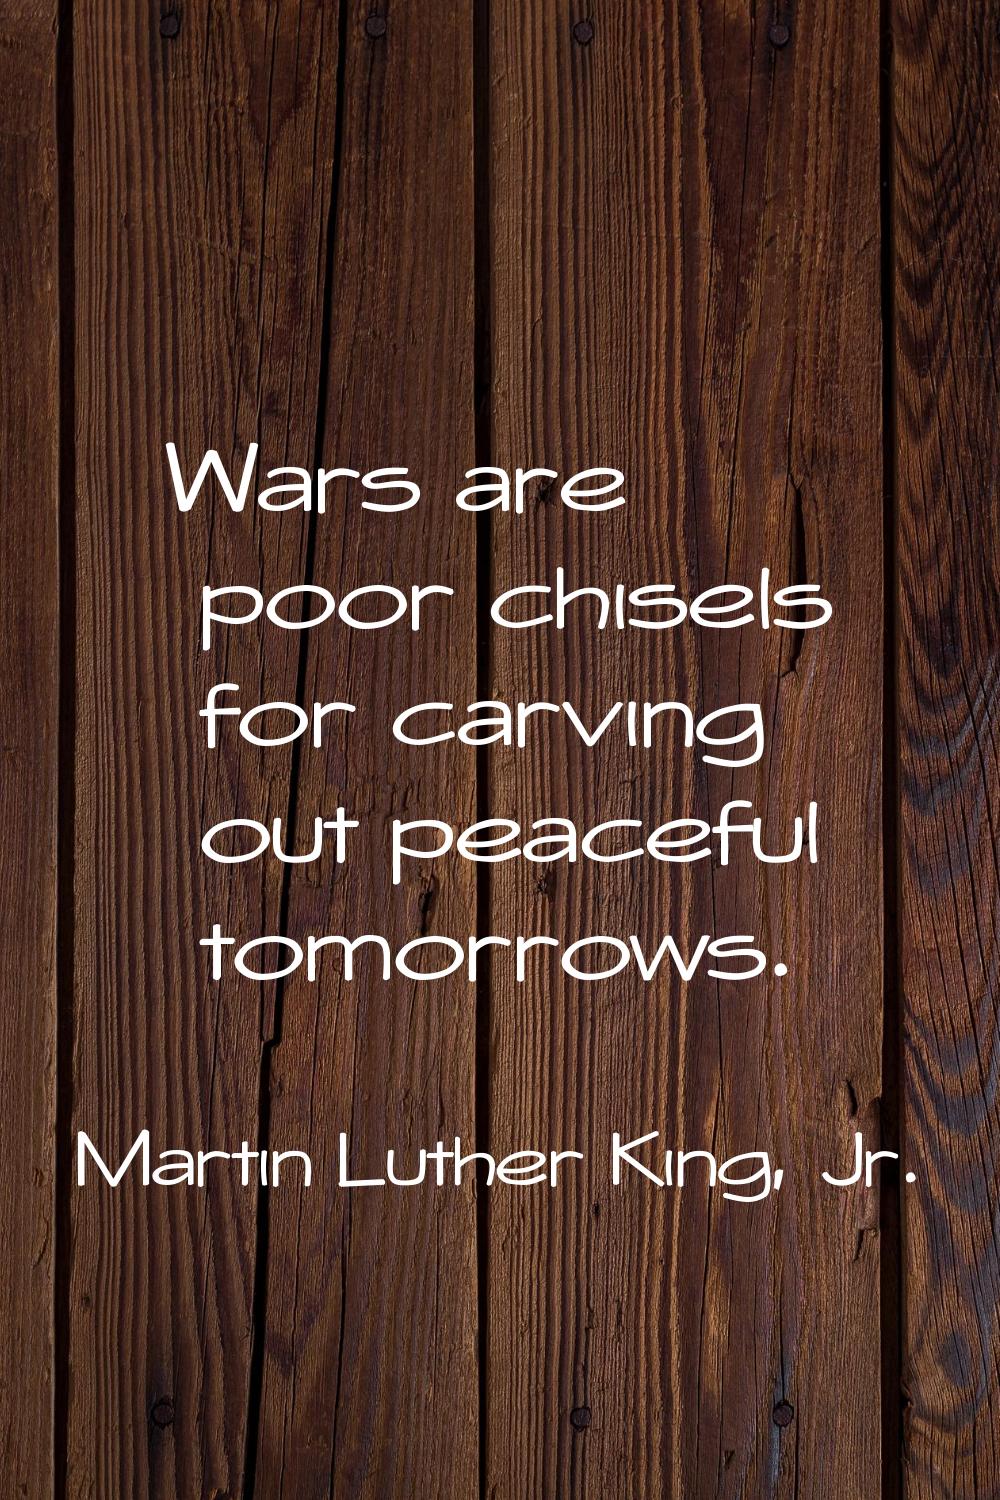 Wars are poor chisels for carving out peaceful tomorrows.